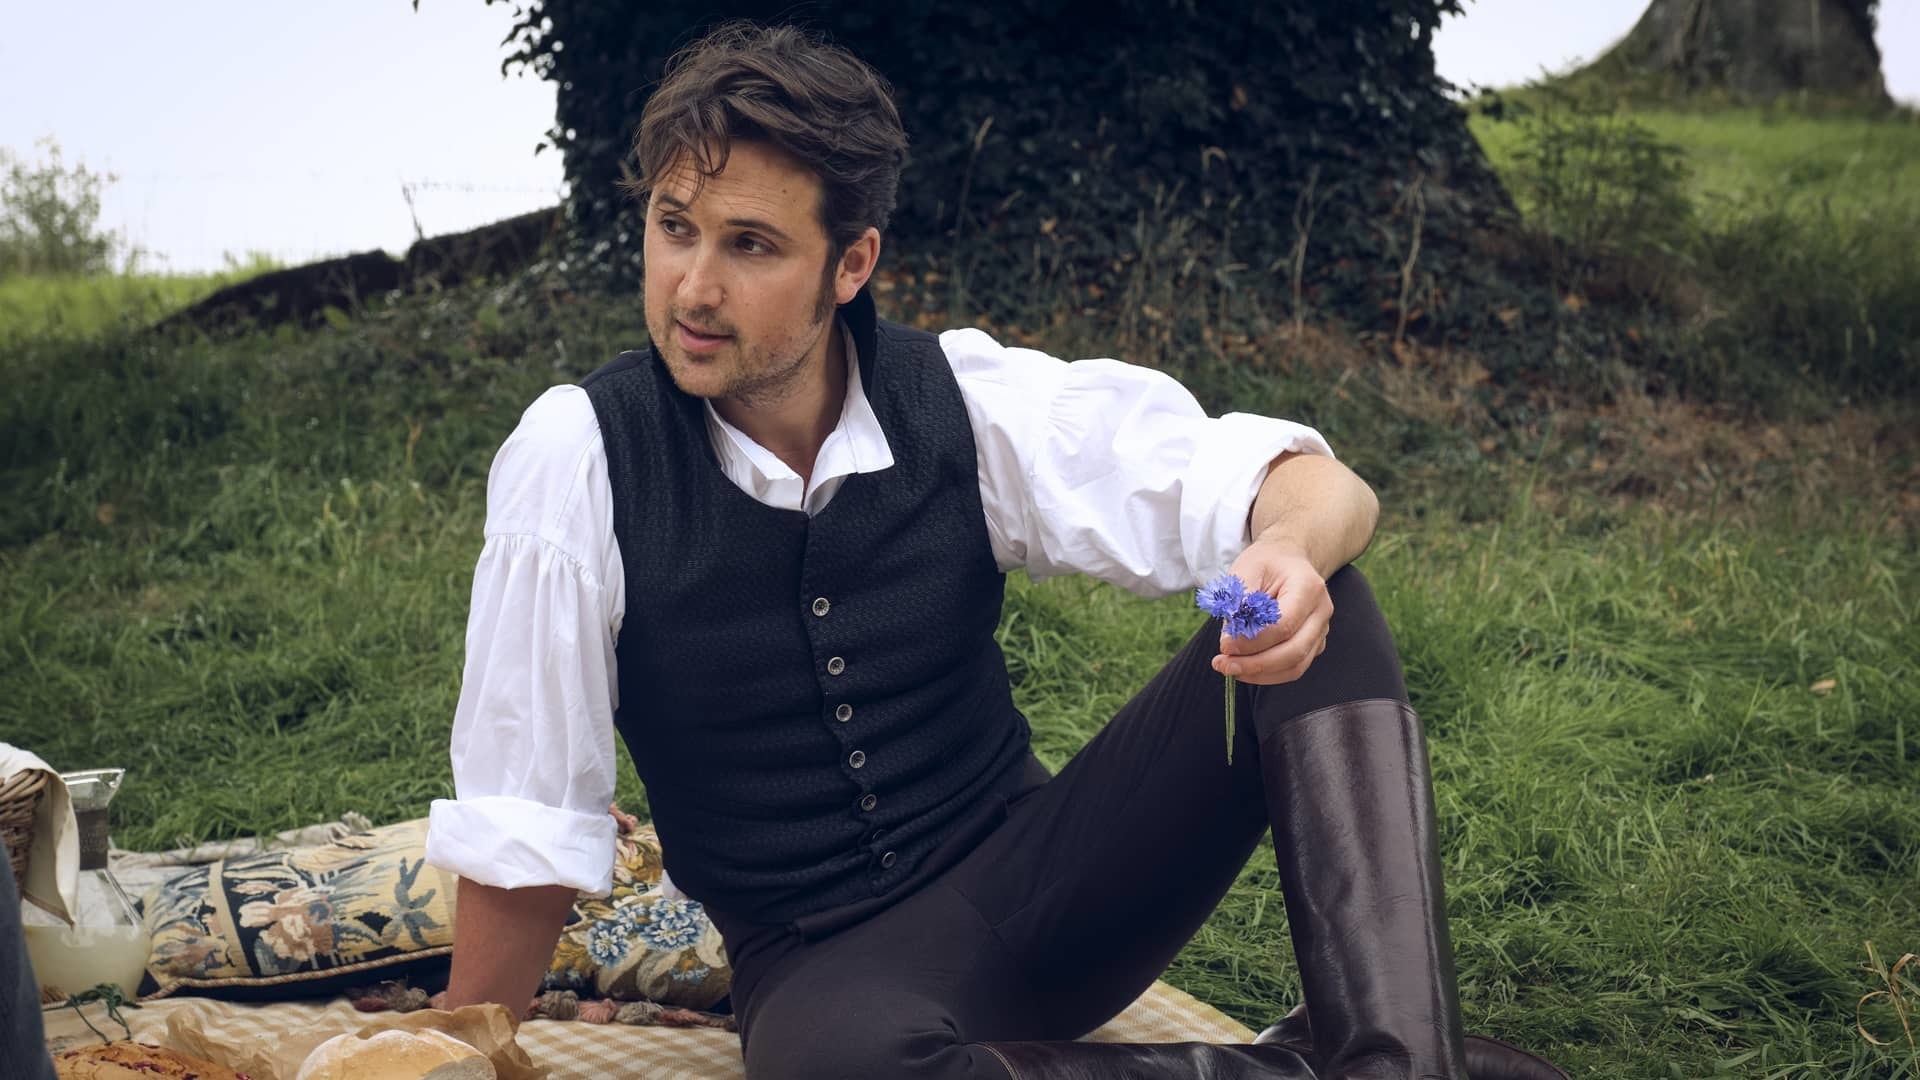 Ben lloyd hughes as alexander colbourne in period costume sitting at a picnic looking super hot